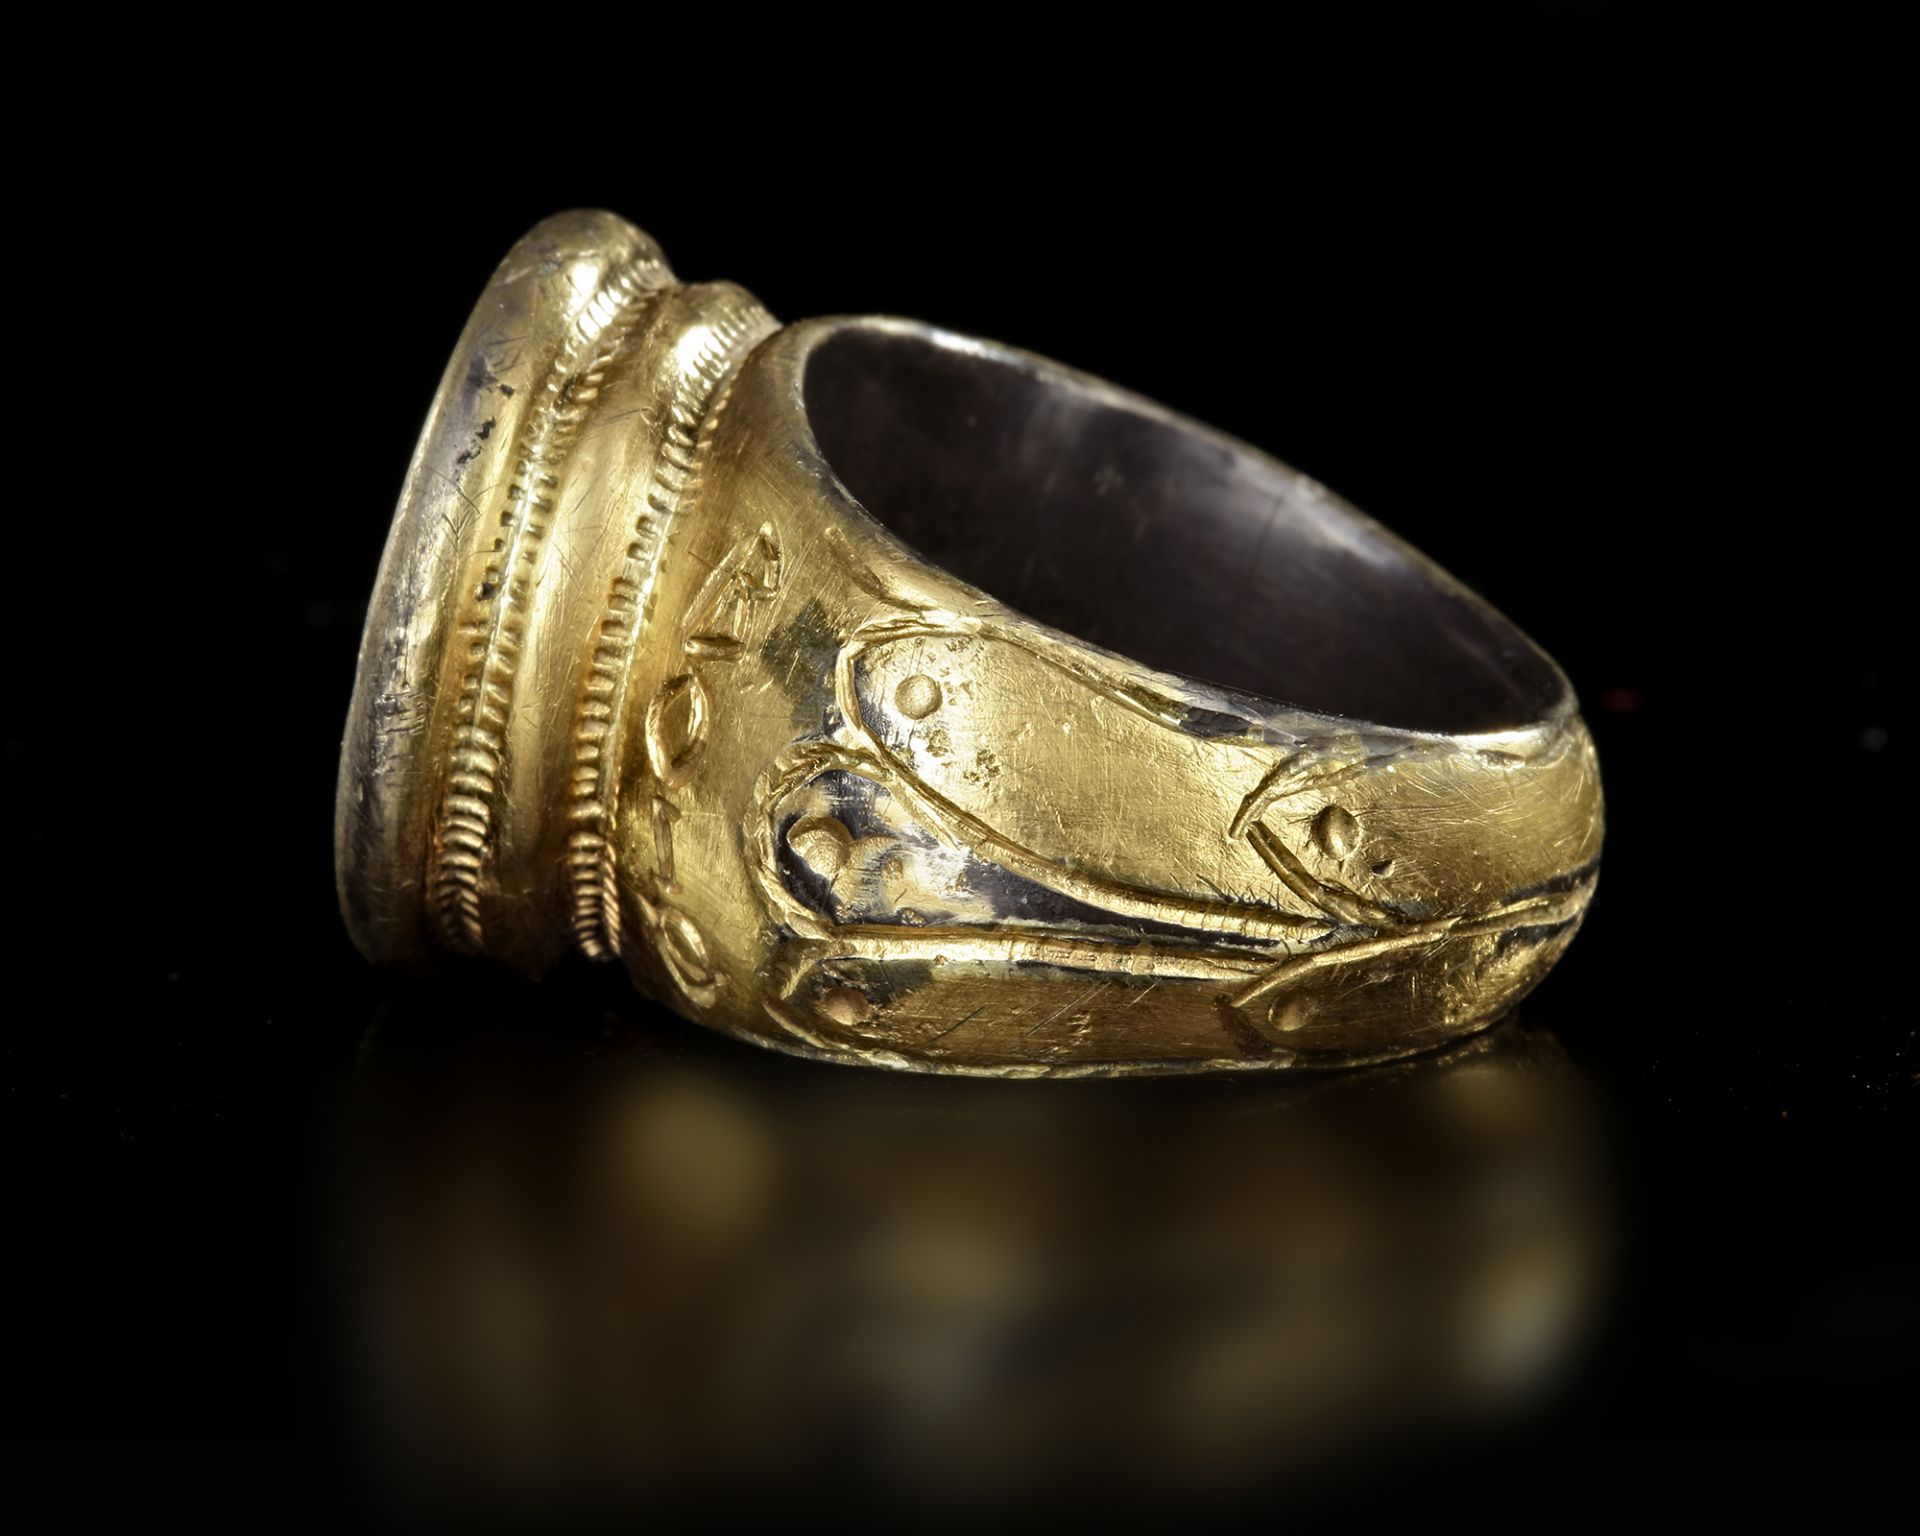 A LARGE SILVER GILT BYZANTINE RING, 8TH-10TH CENTURY AD - Image 5 of 5